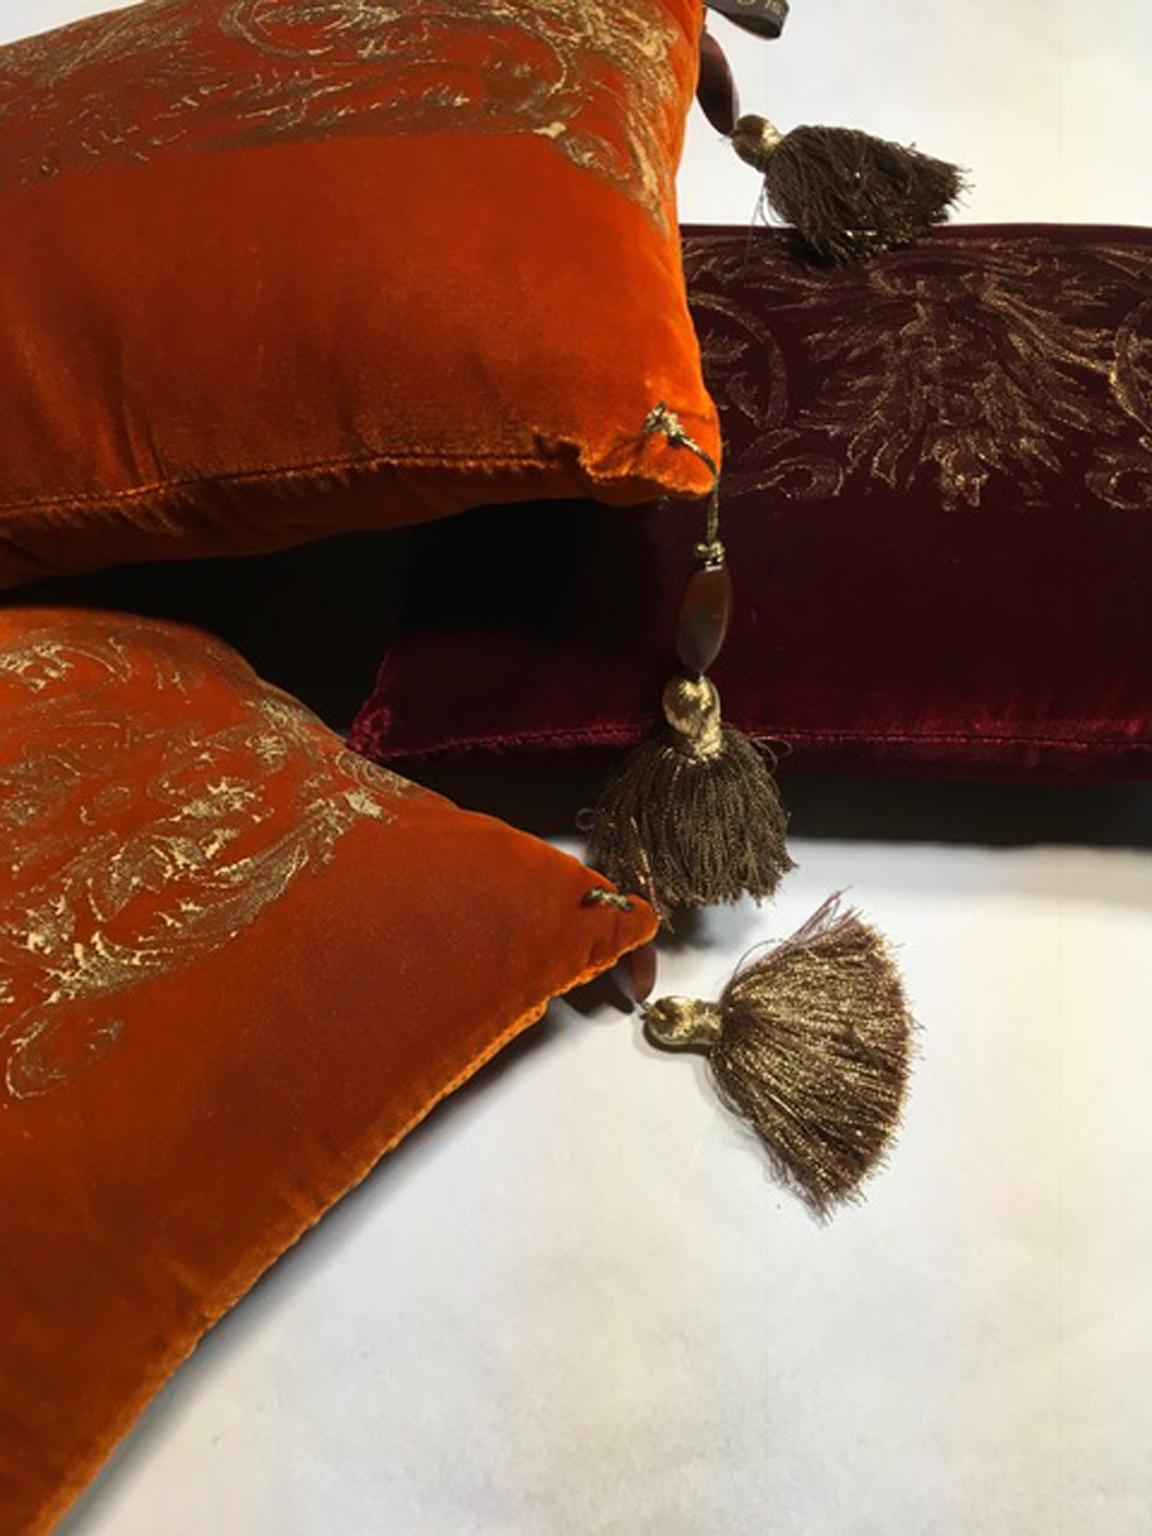 Fortuny Venice style set of two orange tones and one red Rubin silk pillows in golden color hand printed.

This set of pillows is composed by three pieces in three different colors, two orange tone and one in red Rubin.
The pure silk velvet hand